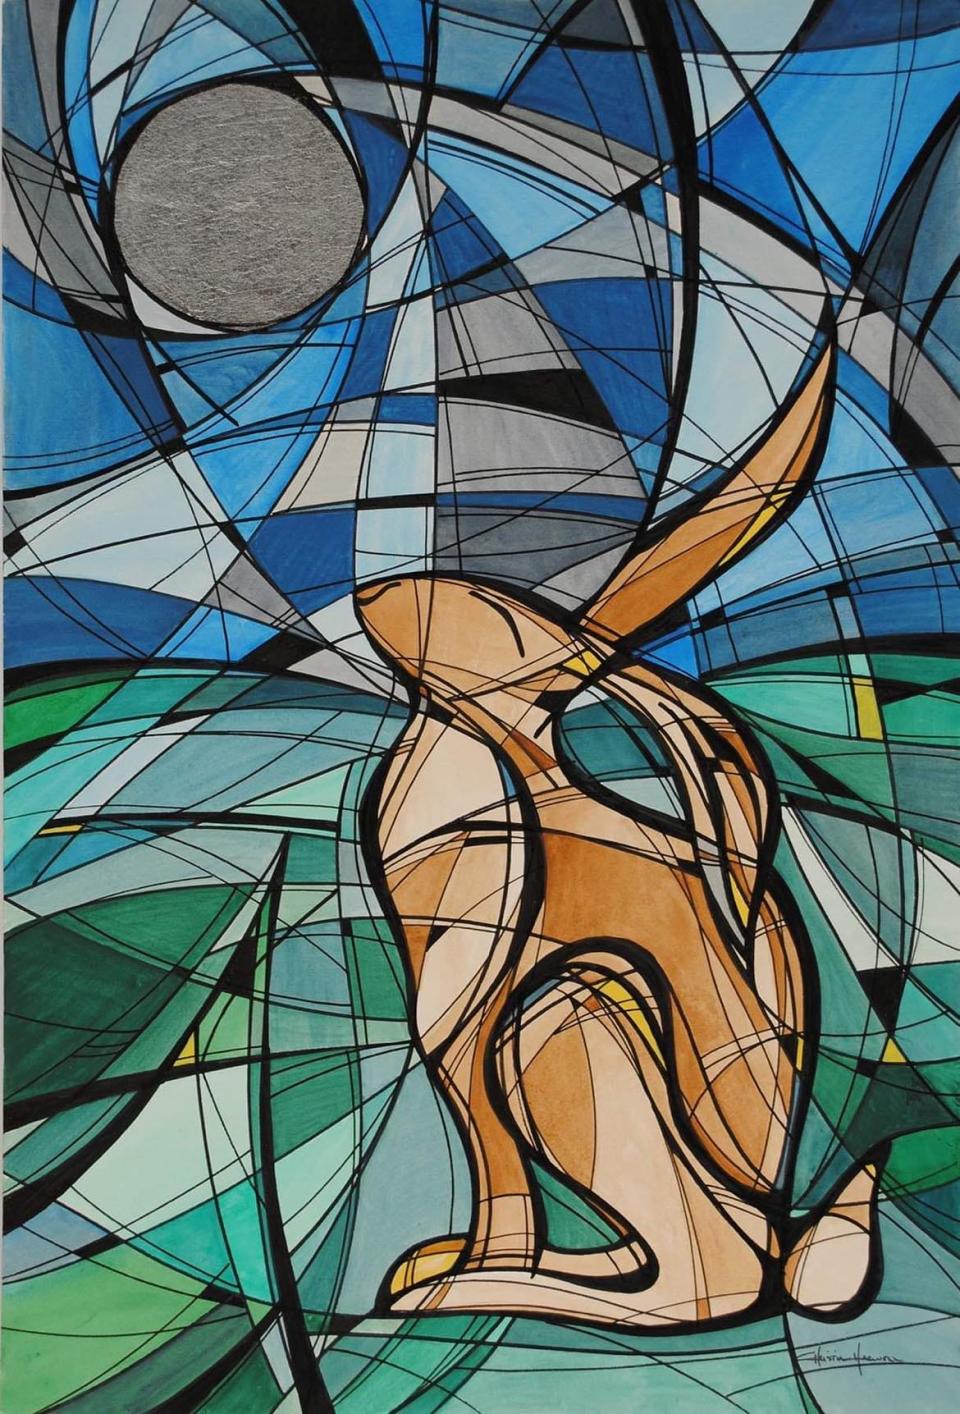 "The Year of the Rabbit" art show is 6 to 10 p.m. Friday at The Hub Art Factory in downtown Canton.